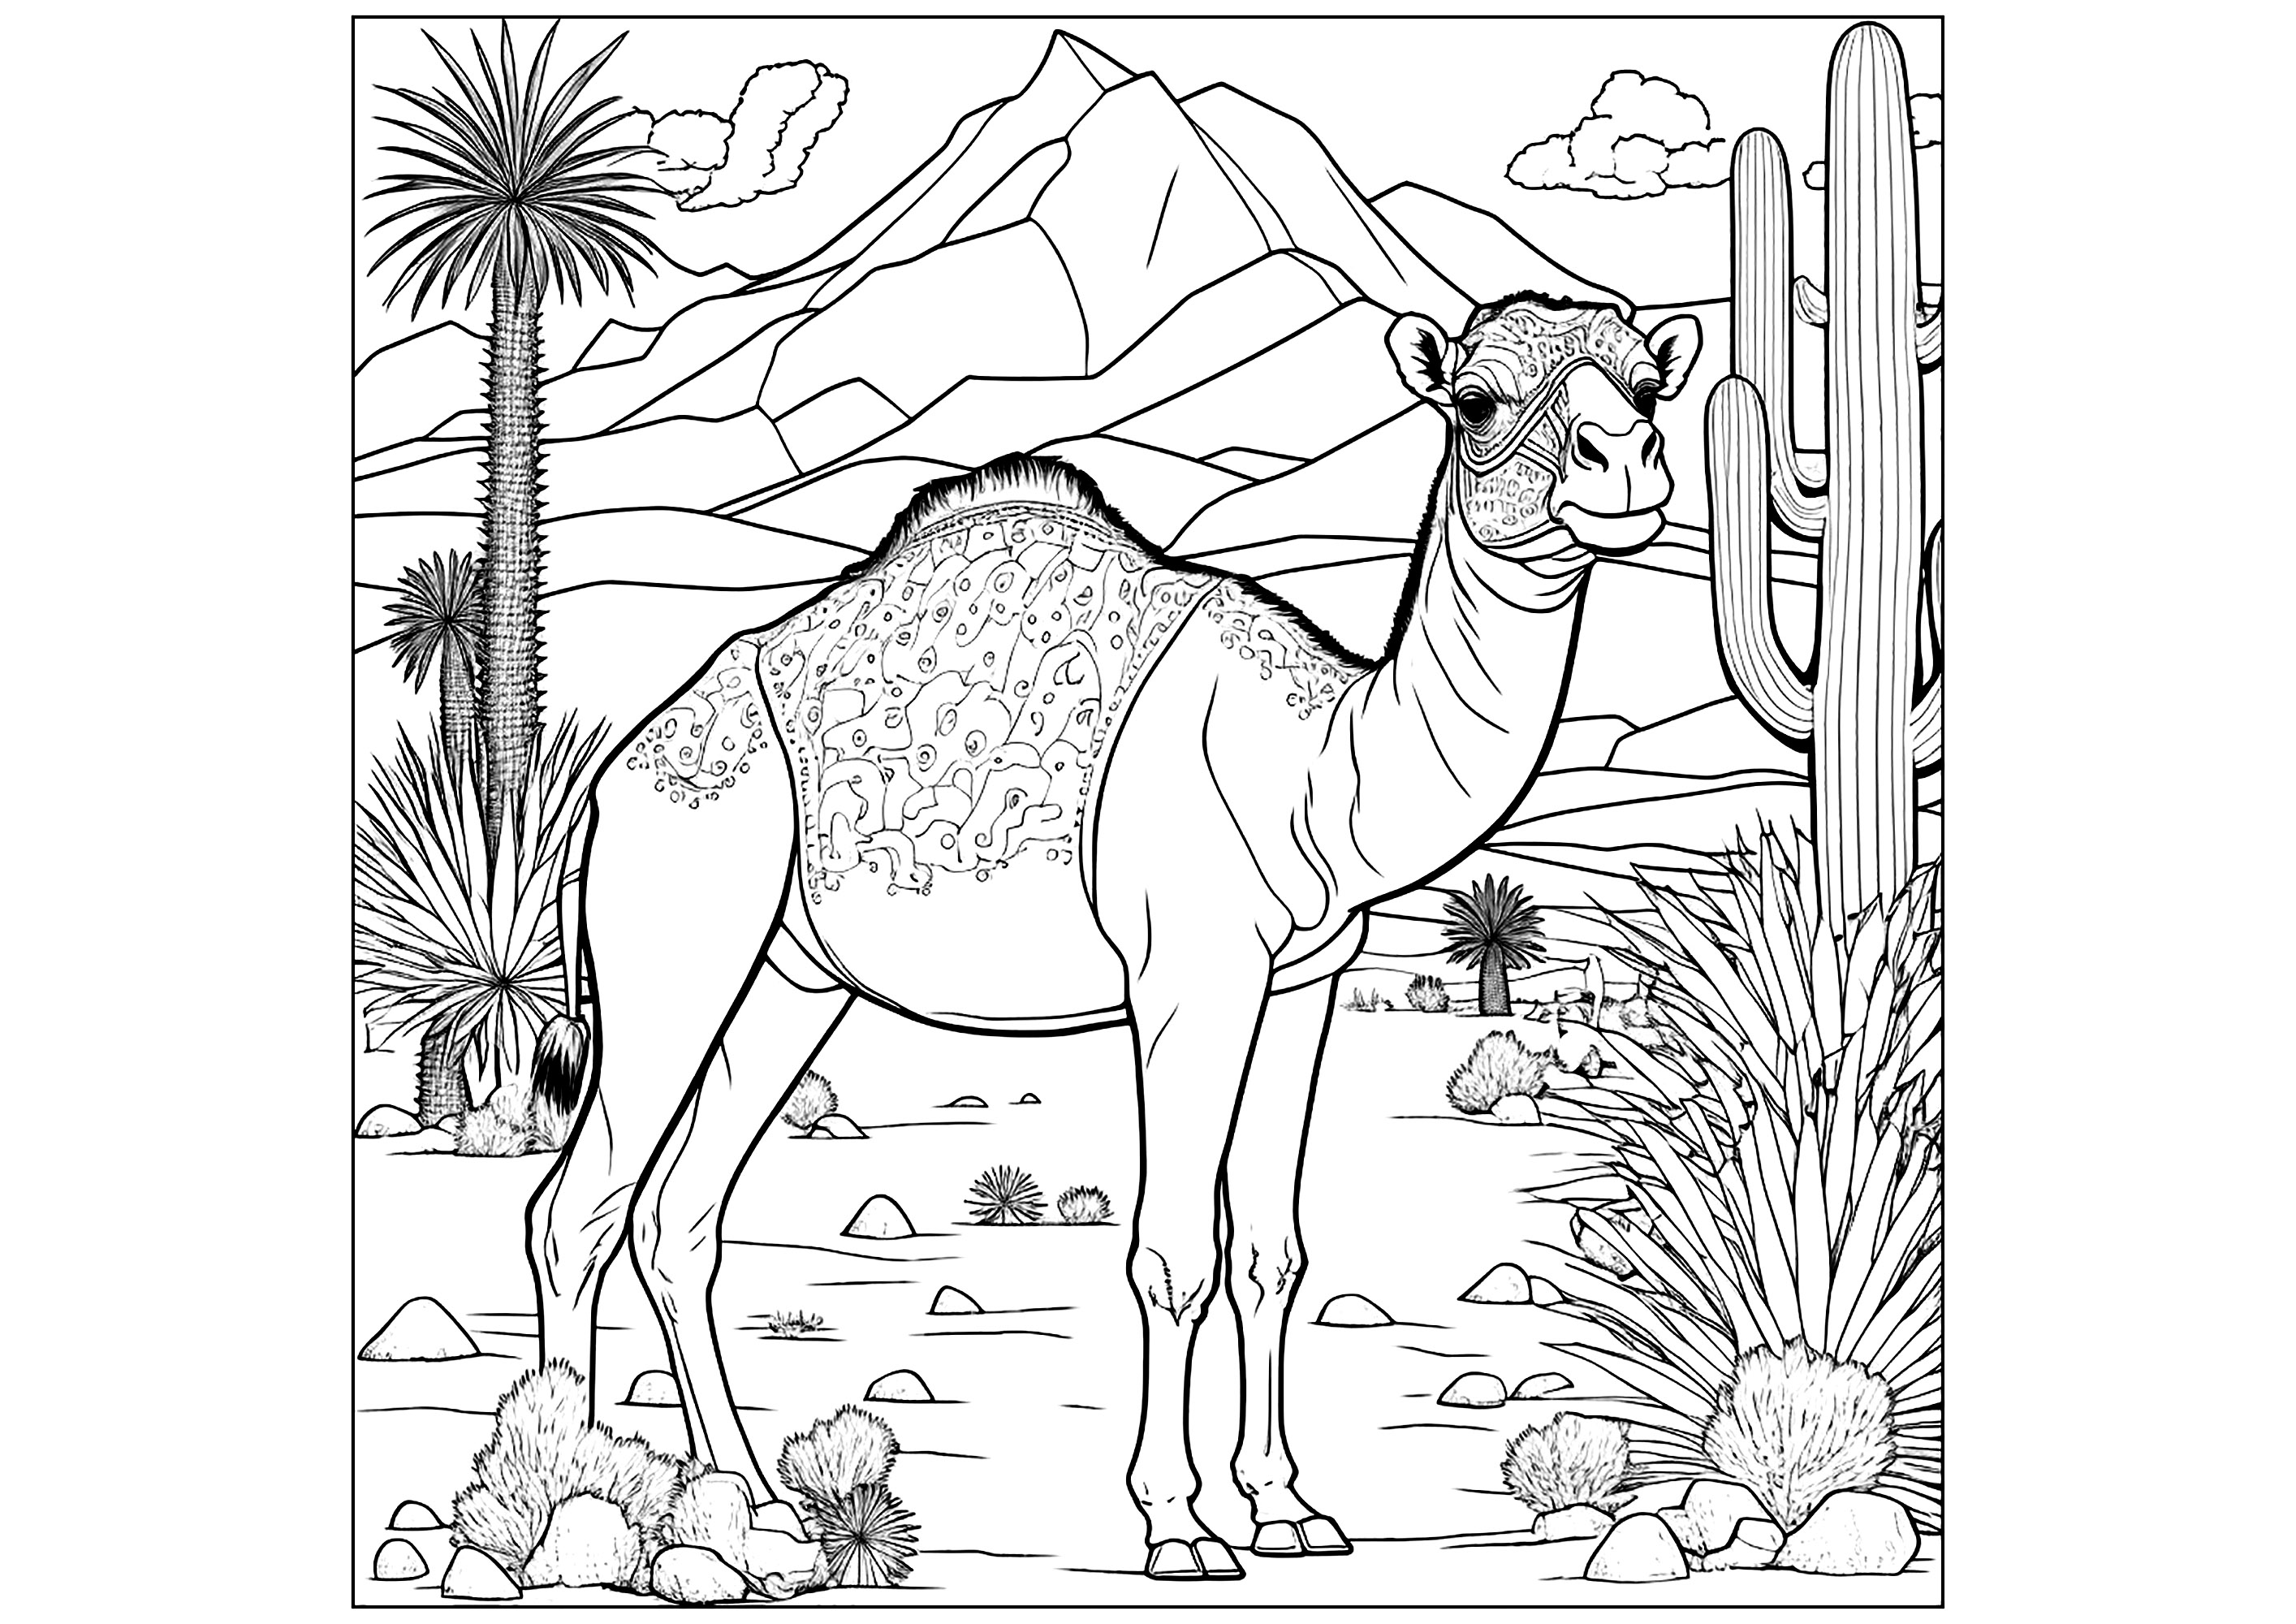 Lovely dromedary coloring, square format. Simple, fun drawing with clear lines and lots of details to color: cacti, mountains, etc...